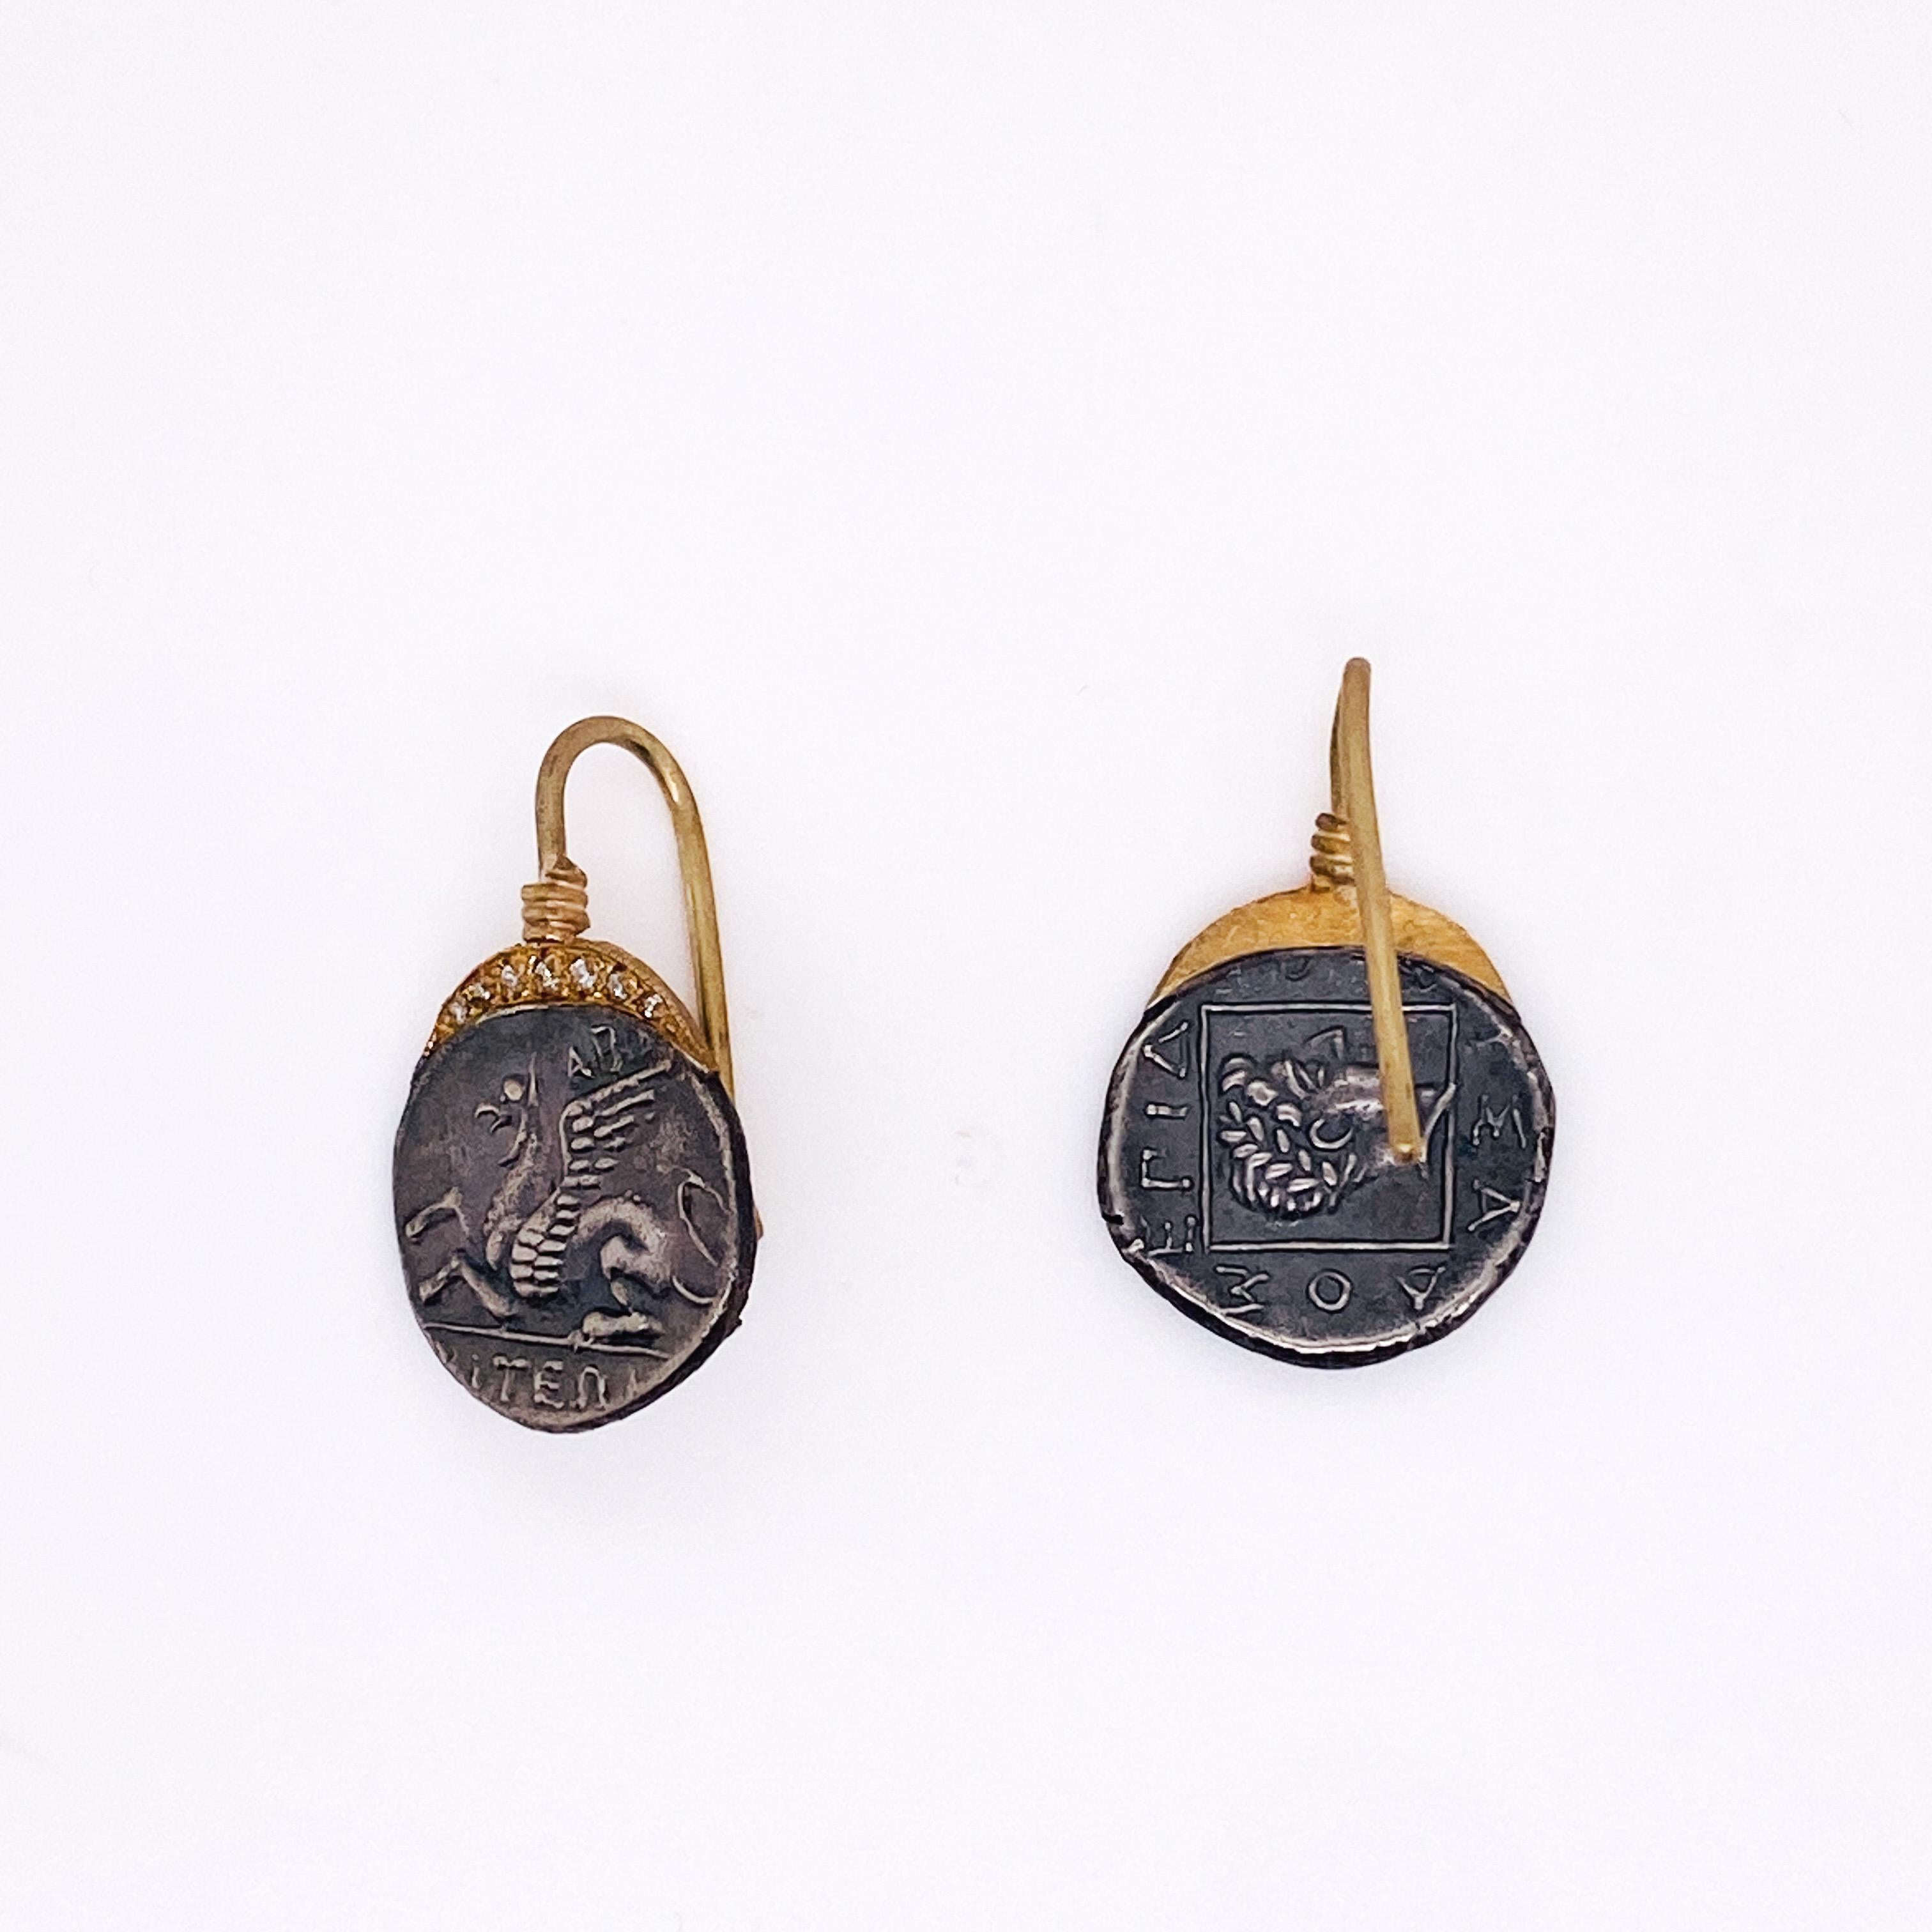 Let yourself fly away with these one-of-a-kind beautiful mixed metal Pegasus earrings. Antiqued sterling silver double sided coins feature Pegasus on the front and a face in profile on the reverse. Above the coins are a crescent of 24 karat yellow